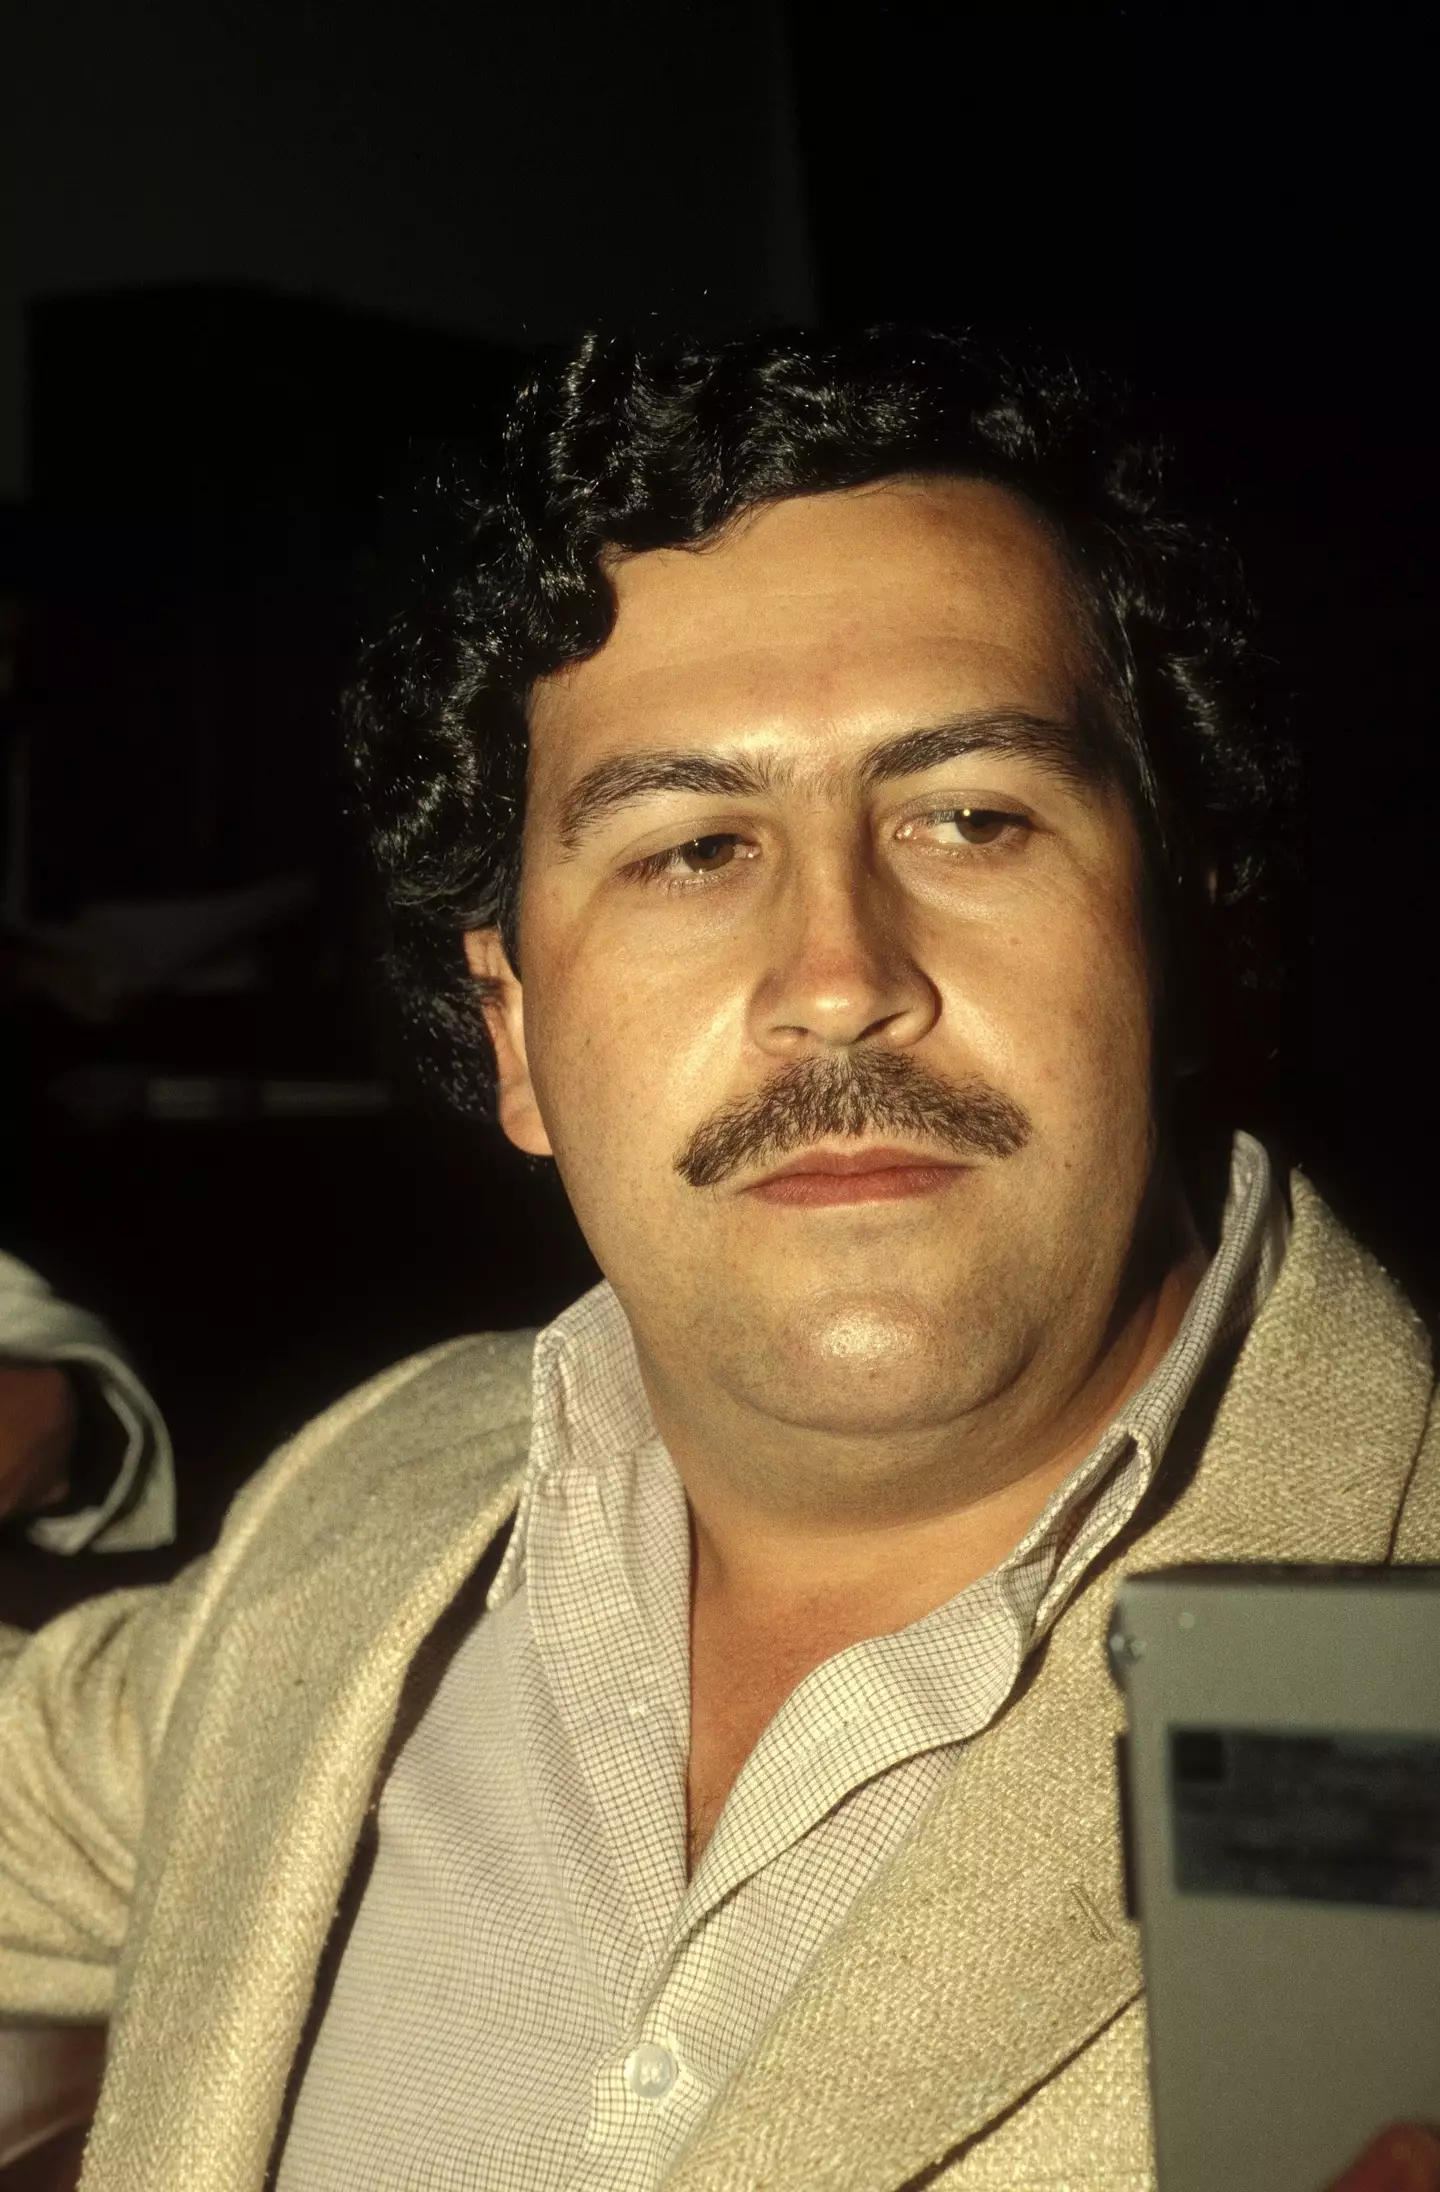 Colombian drug lord Pablo Escobar died in 1993. (Eric VANDEVILLE/Gamma-Rapho via Getty Images)